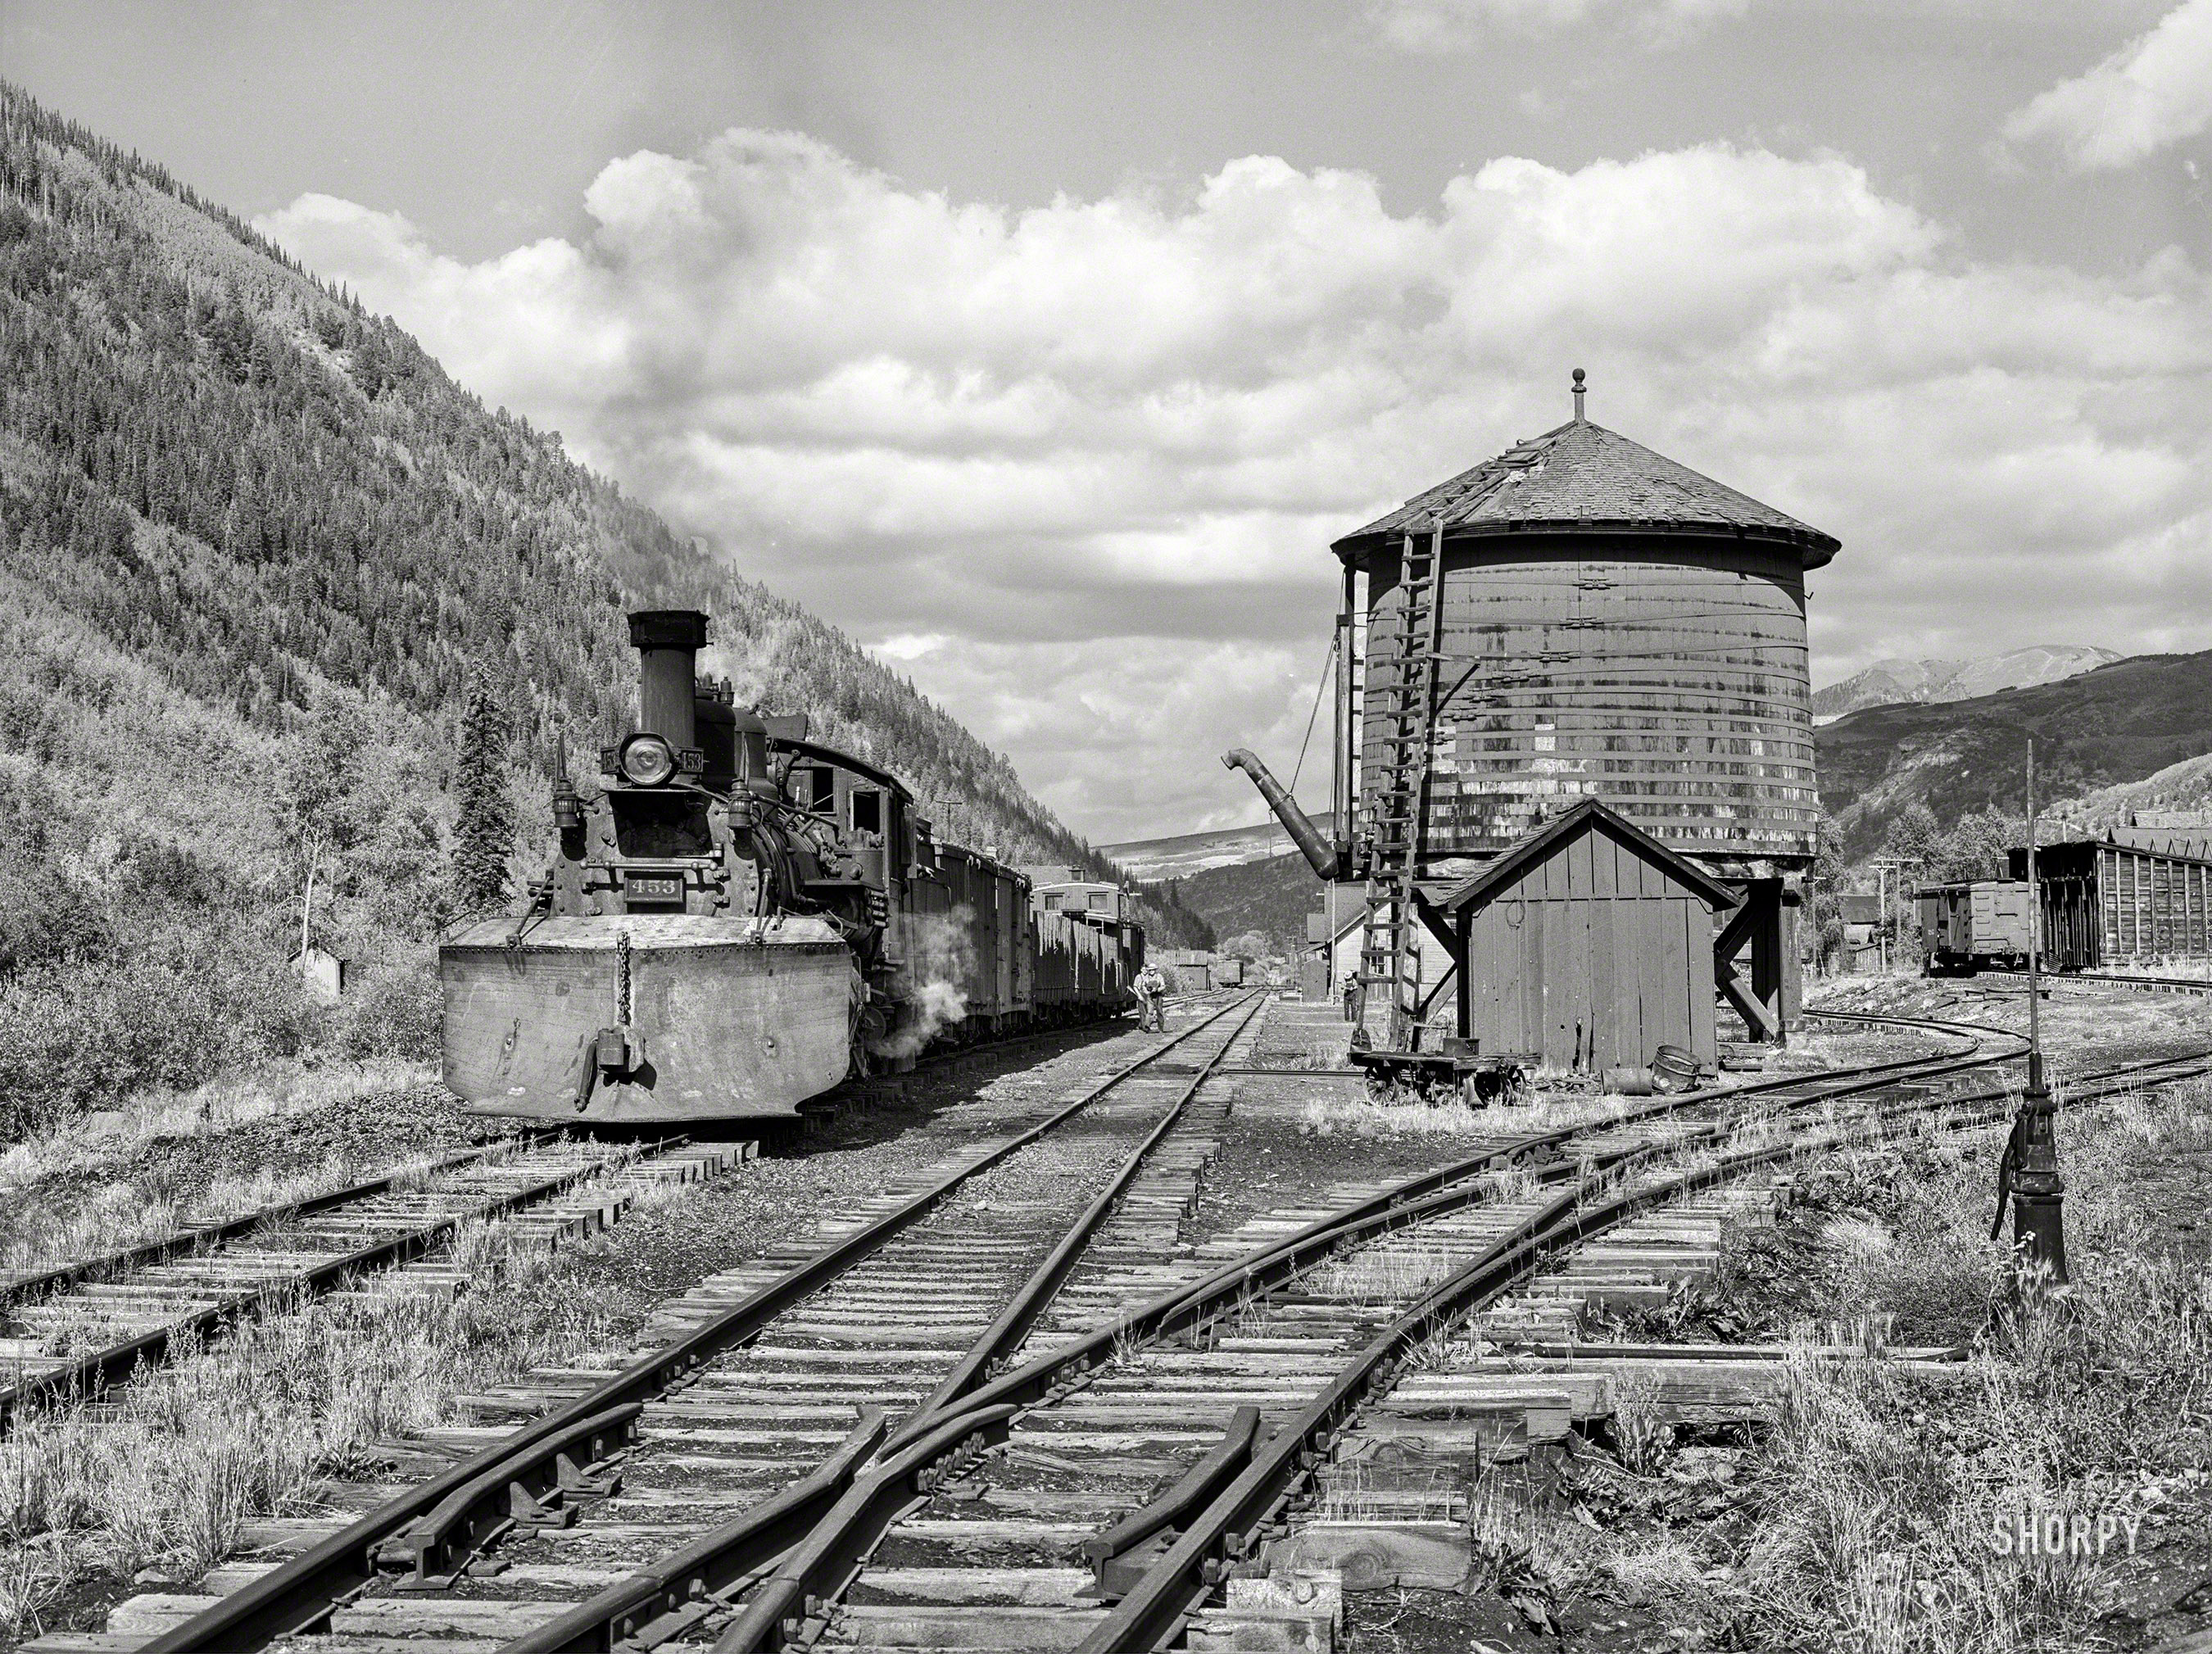 September 1940. "Narrow gauge railway yards, train and water tank at Telluride, Colorado." Medium format negative by Russell Lee for the Farm Security Administration. View full size.